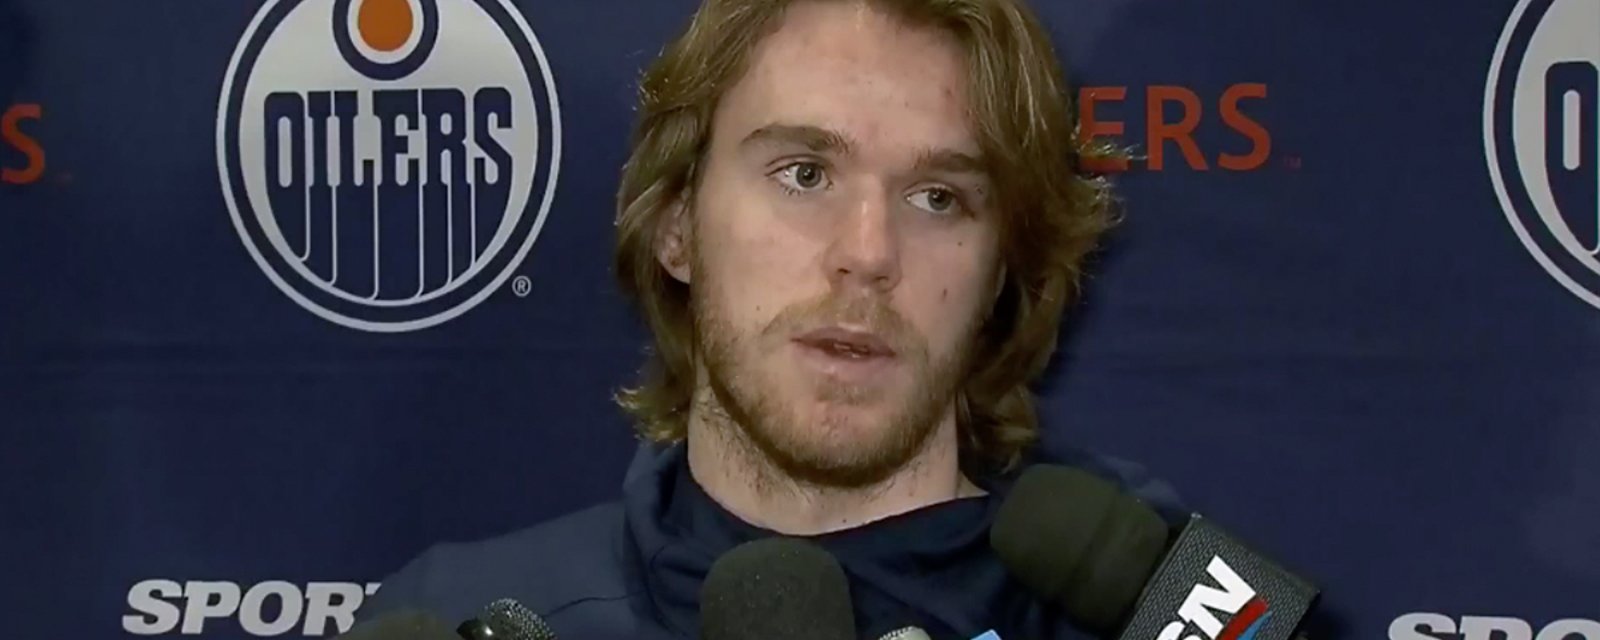 Oilers call emergency meeting, McDavid calls out teammates saying, “you need to leave.”